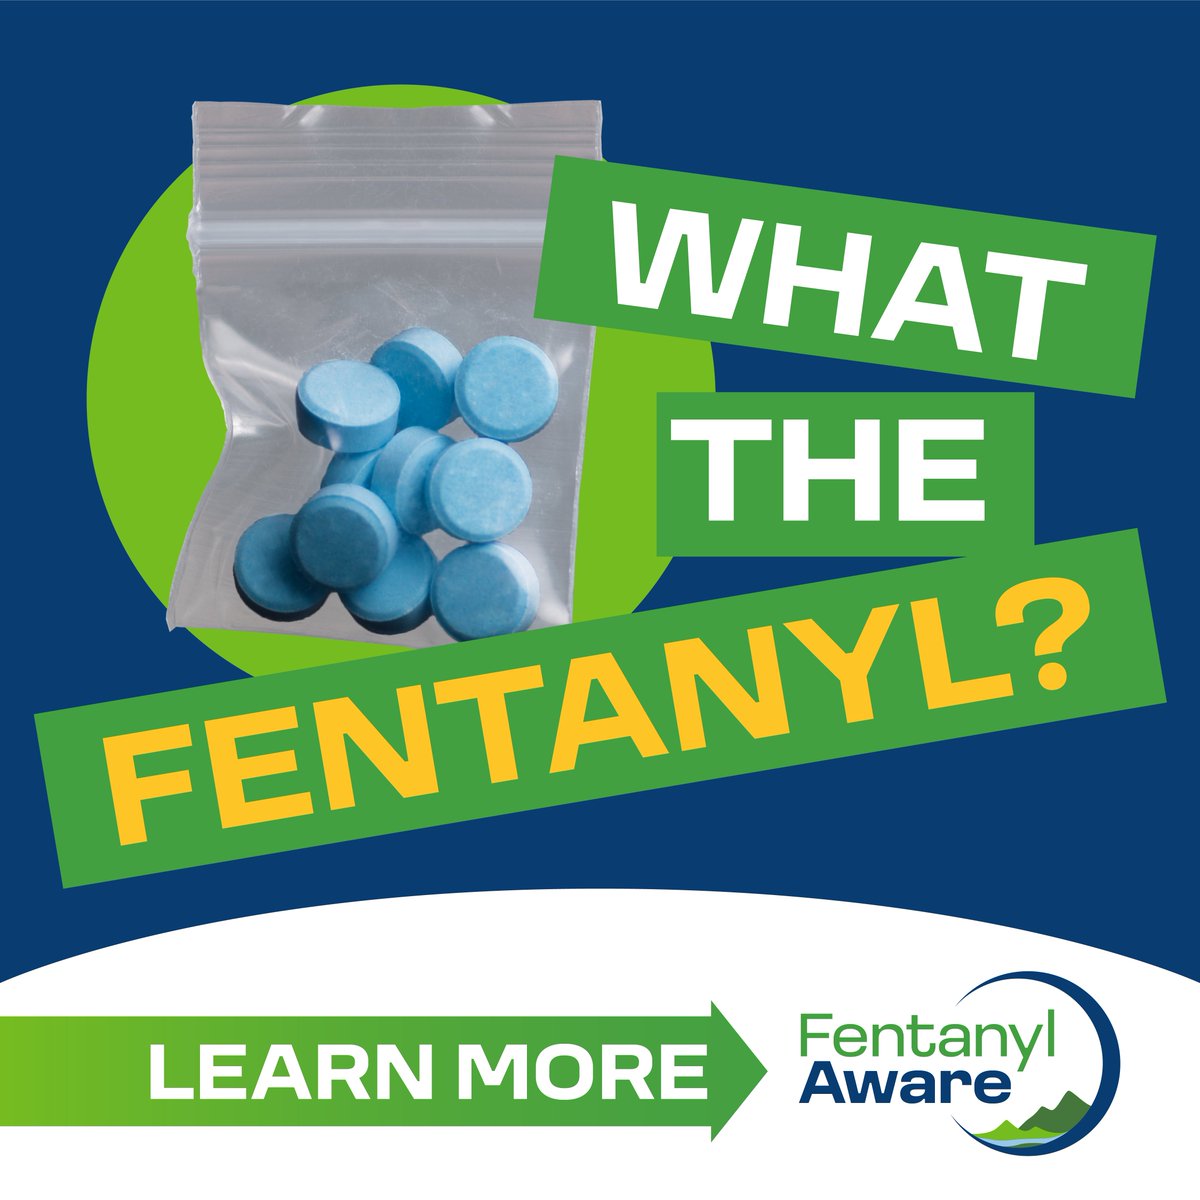 On this National Fentanyl Awareness Day, help raise awareness about the dangers of fentanyl. We’ll be sharing information over the next few weeks to raise awareness, courtesy of Lane County.

Learn more at ow.ly/1CsA50Ry1Ls